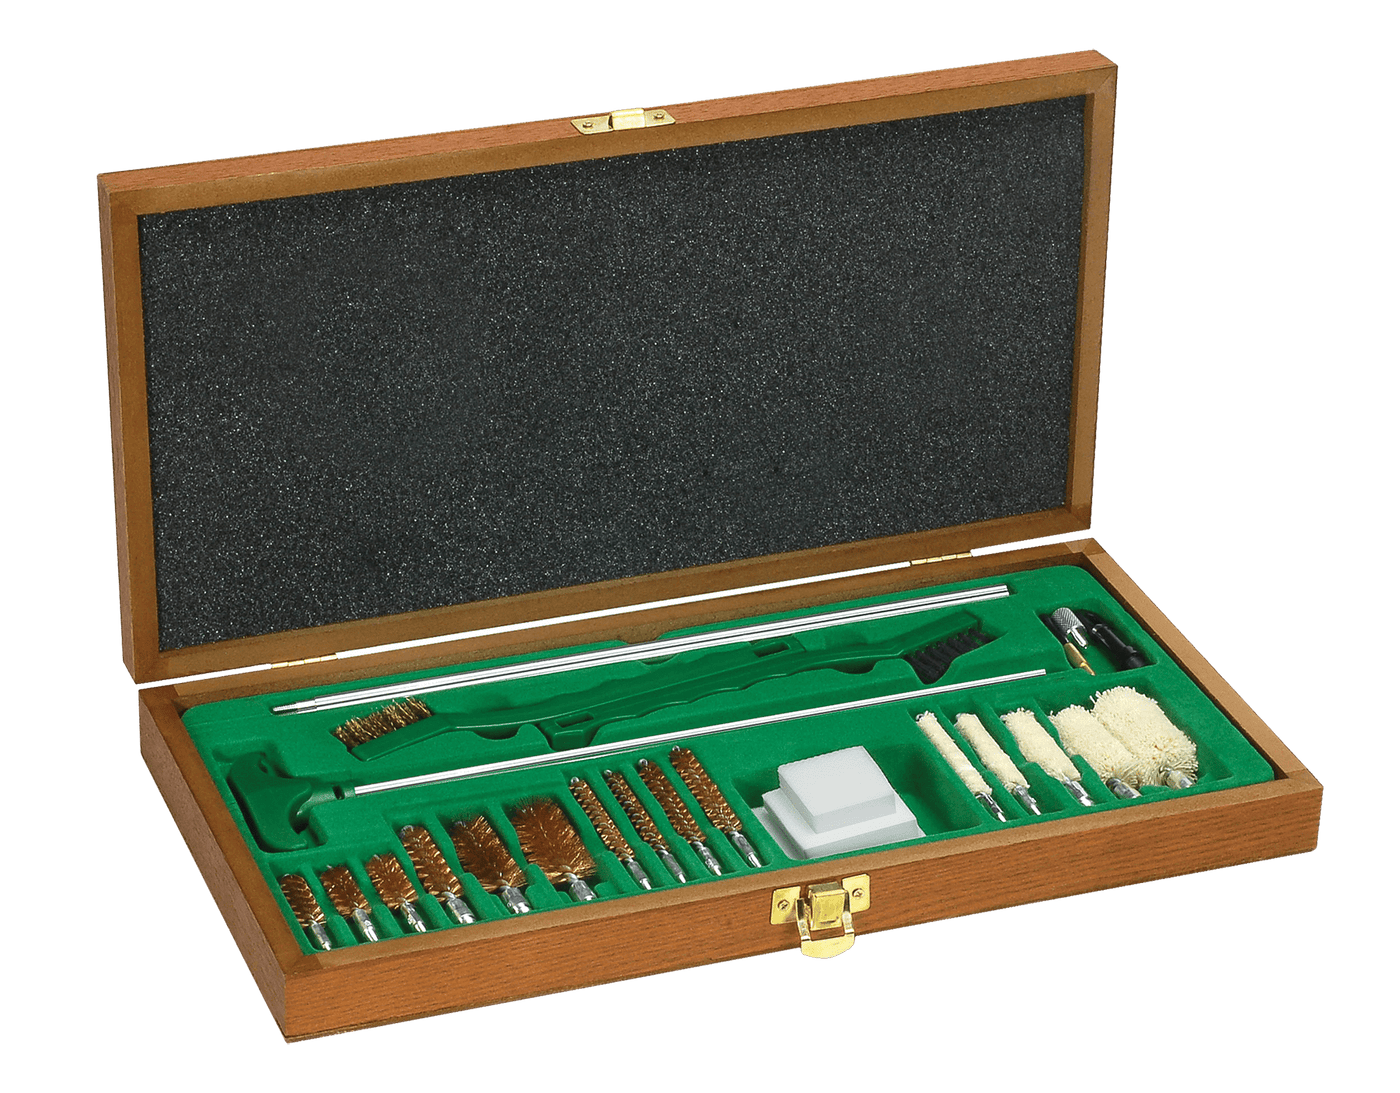 Remington Remington Sportsman Cleaning Kit Shooting Gear and Acc